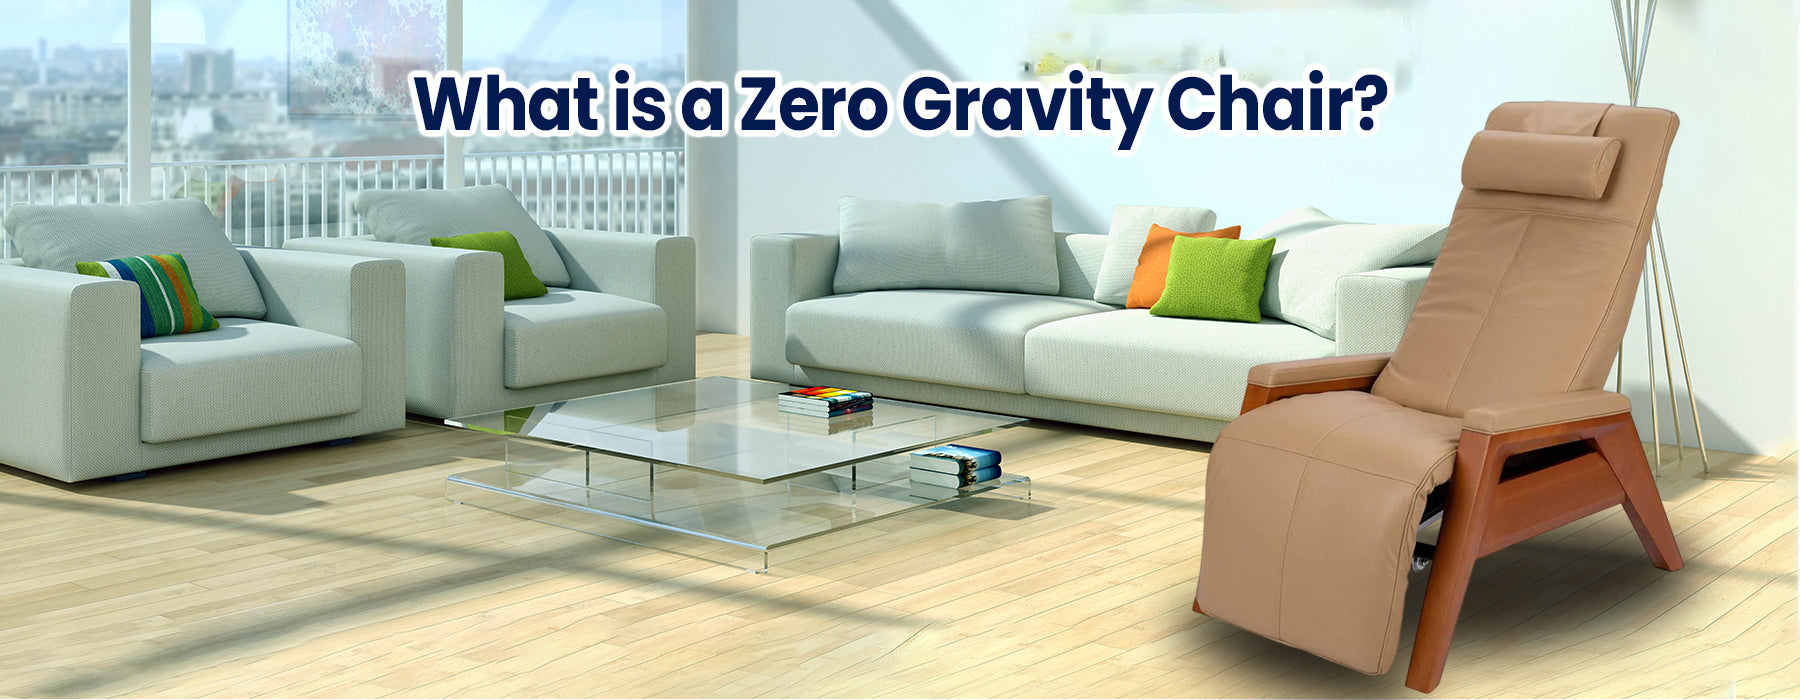 Comfort Meets Innovation:  What is a Zero Gravity Chair?